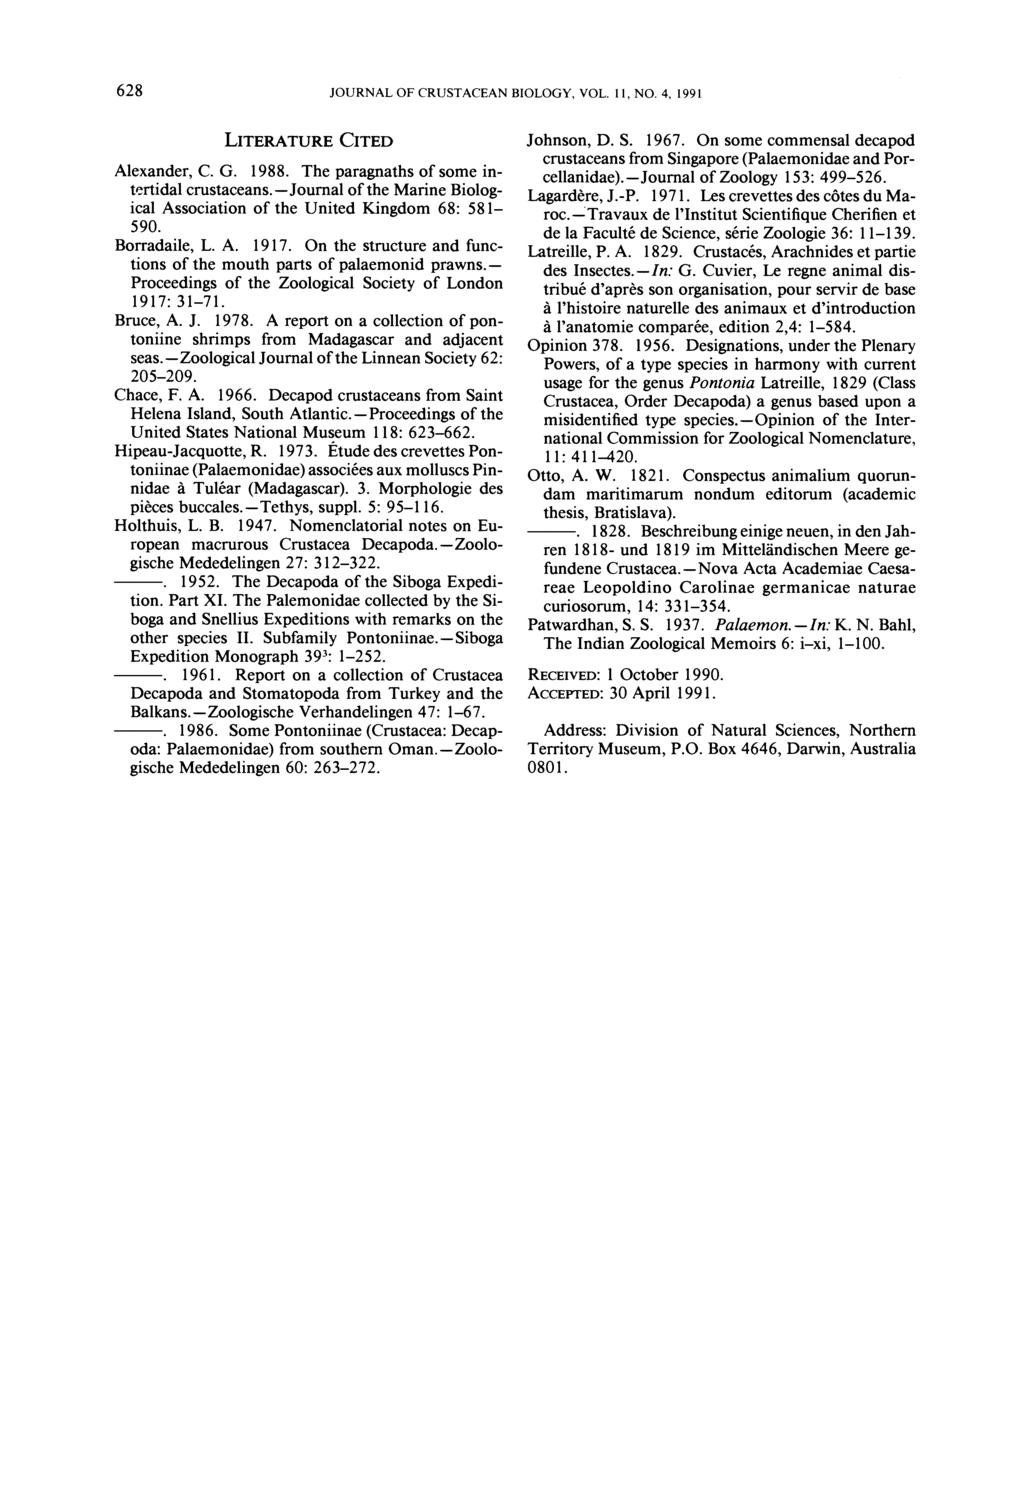 628 JOURNAL OF CRUSTACEAN BIOLOGY, VOL. 11, NO. 4, 1991 LITERATURE CITED Johnson, D. S. 1967. On some commensal decapod crustaceans from Singapore (Palaemonidae and Por- Alexander, C. G. 1988.